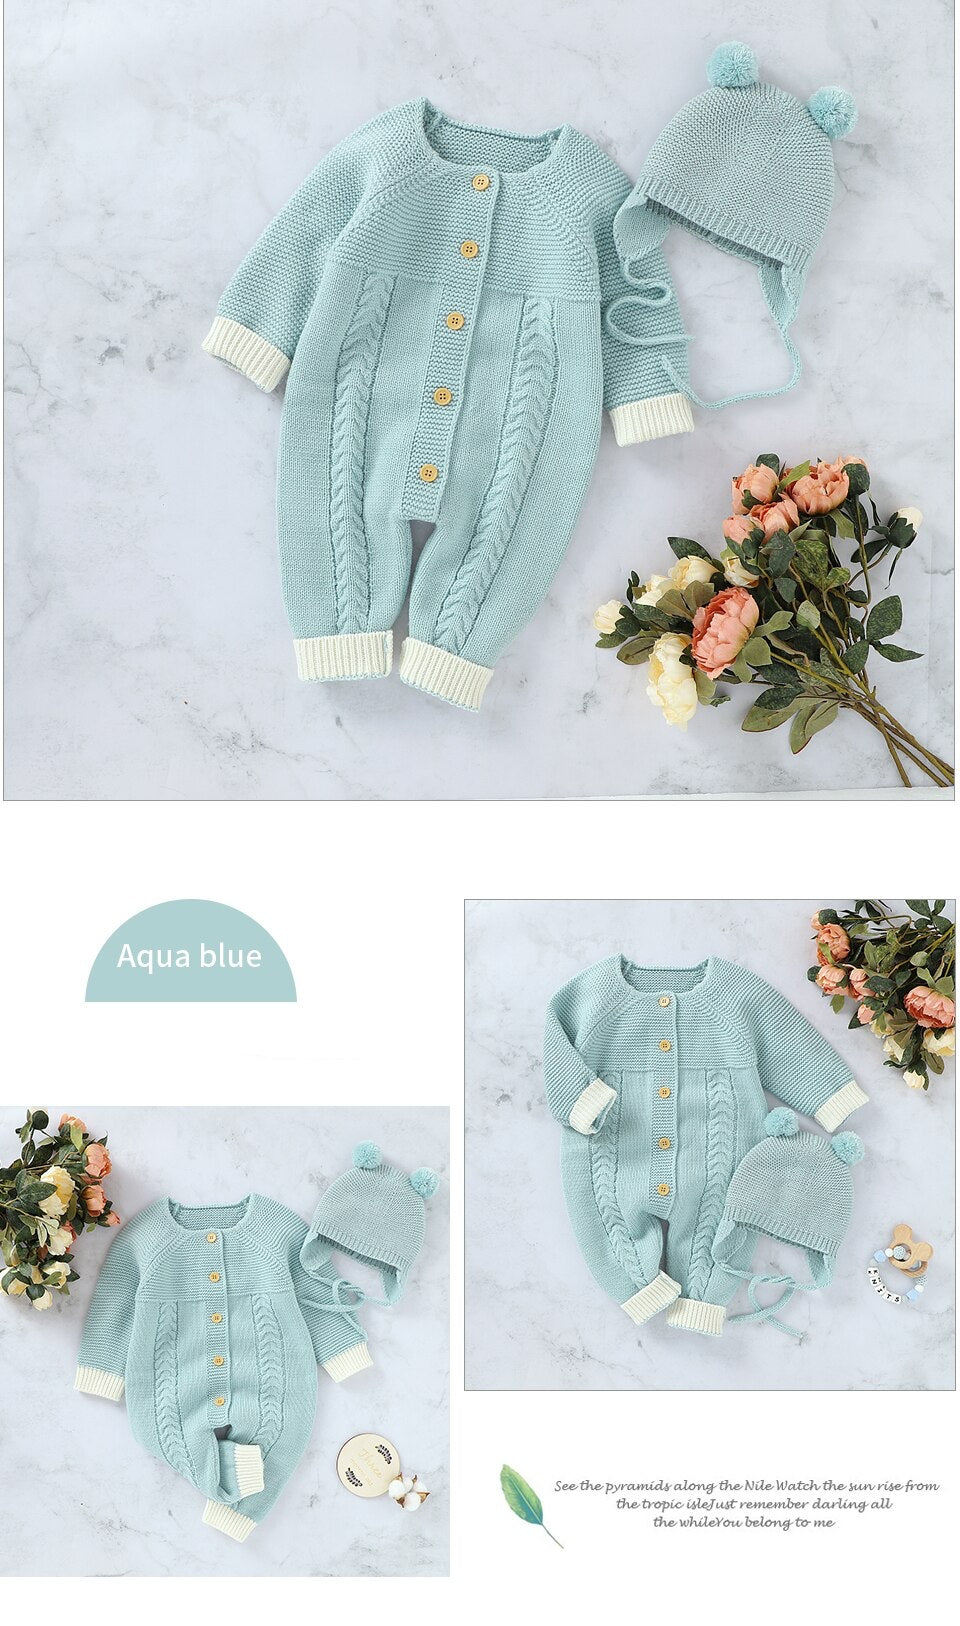 Baby Boys Girls Long Sleeve Knitted Jumpsuit - Blue.